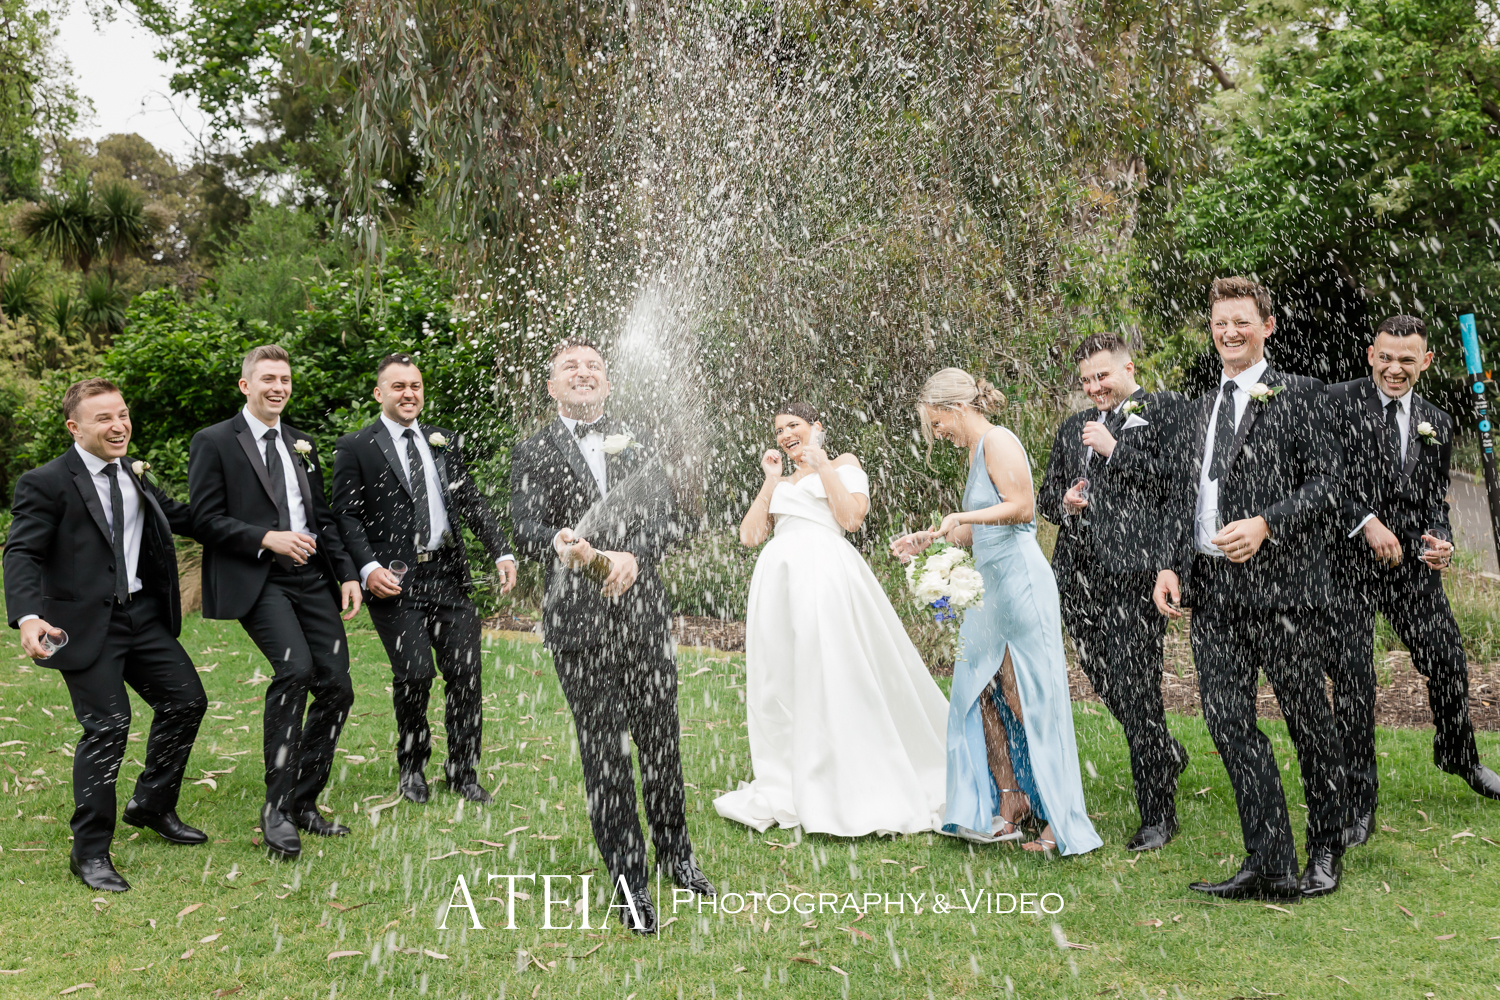 , Natalie and Chris&#8217; wedding photography at The Terrace Royal Botanical Gardens captured by ATEIA Photography &#038; Video